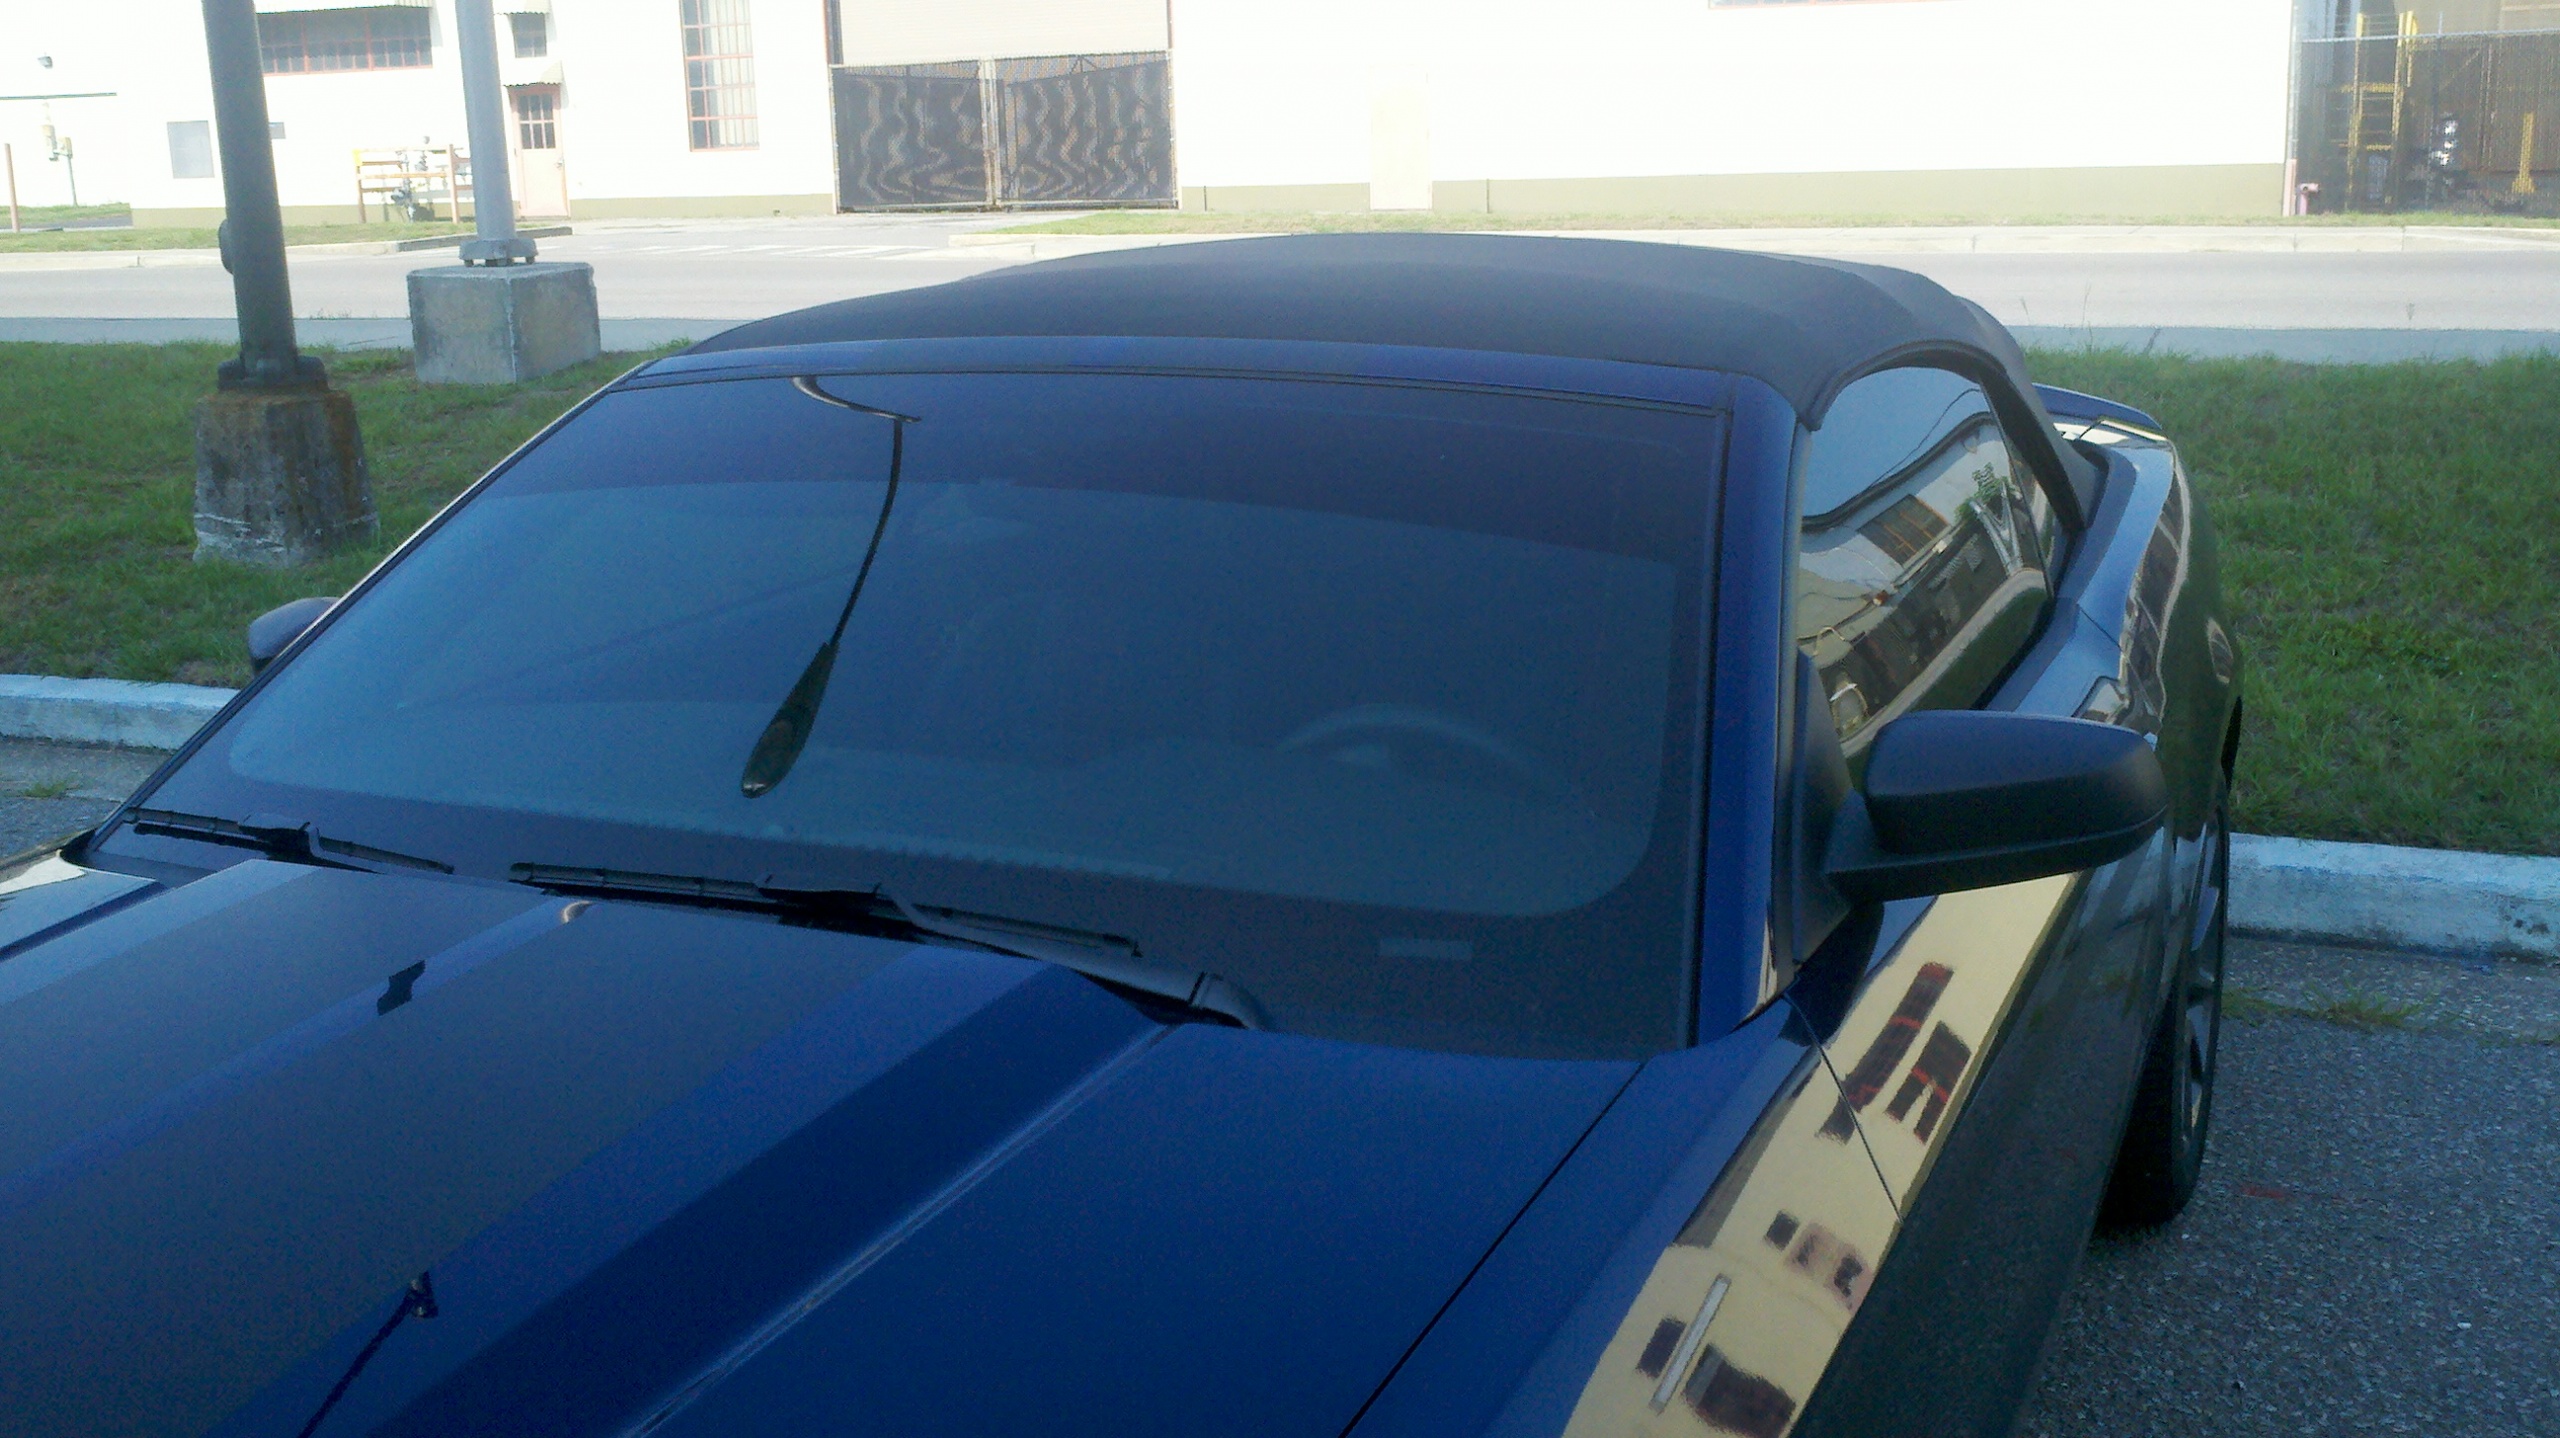 Window Tint Percent On Kona Page 2 The Mustang Source Ford Mustang Forums